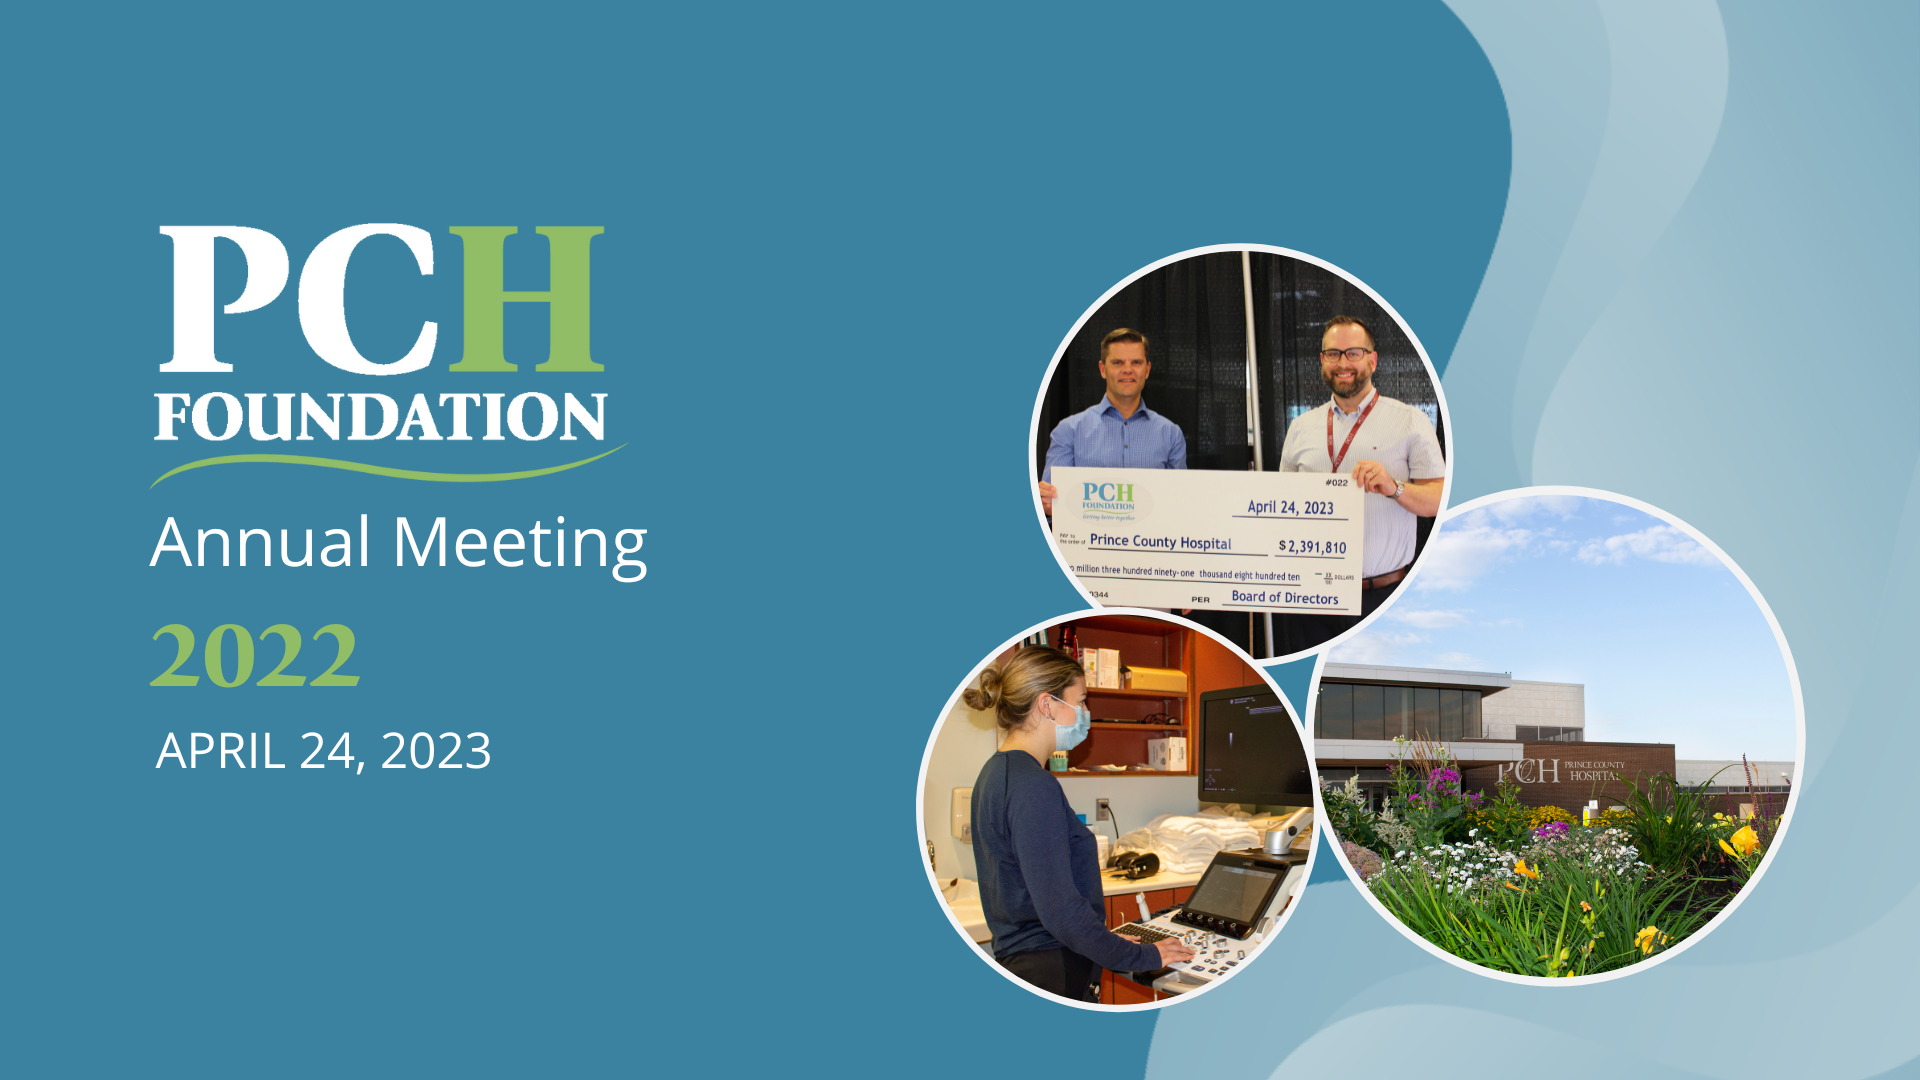 PCH Foundation 2022 Annual Meeting